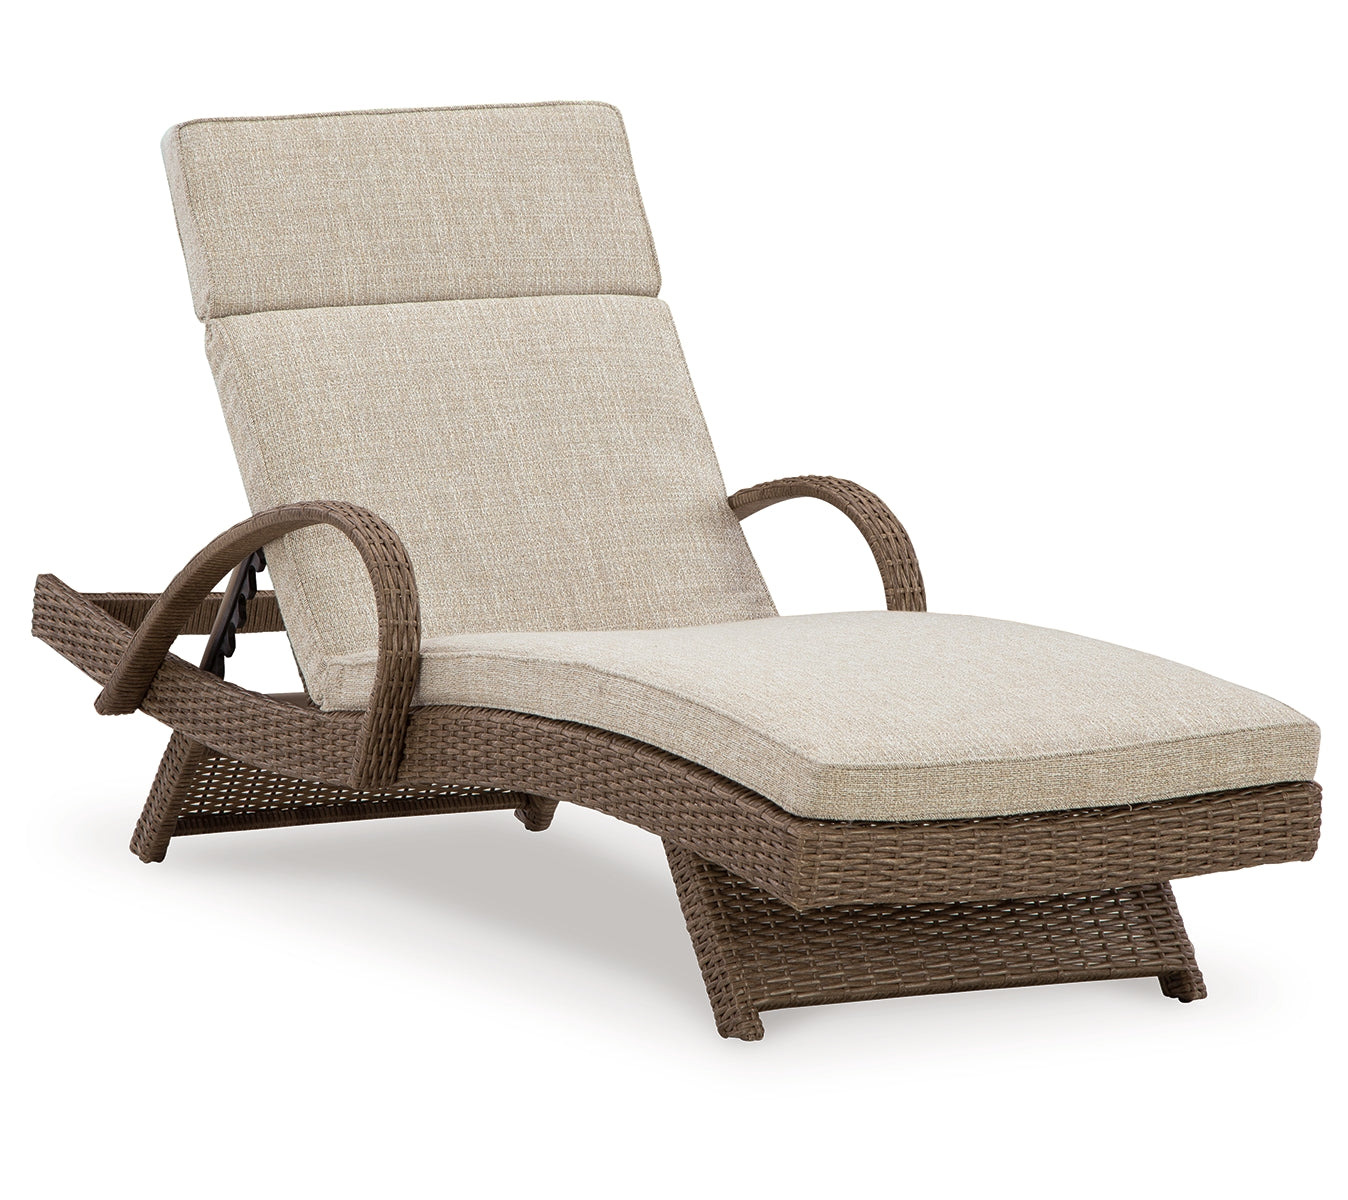 Beachcroft Outdoor Chaise Lounge with Cushion